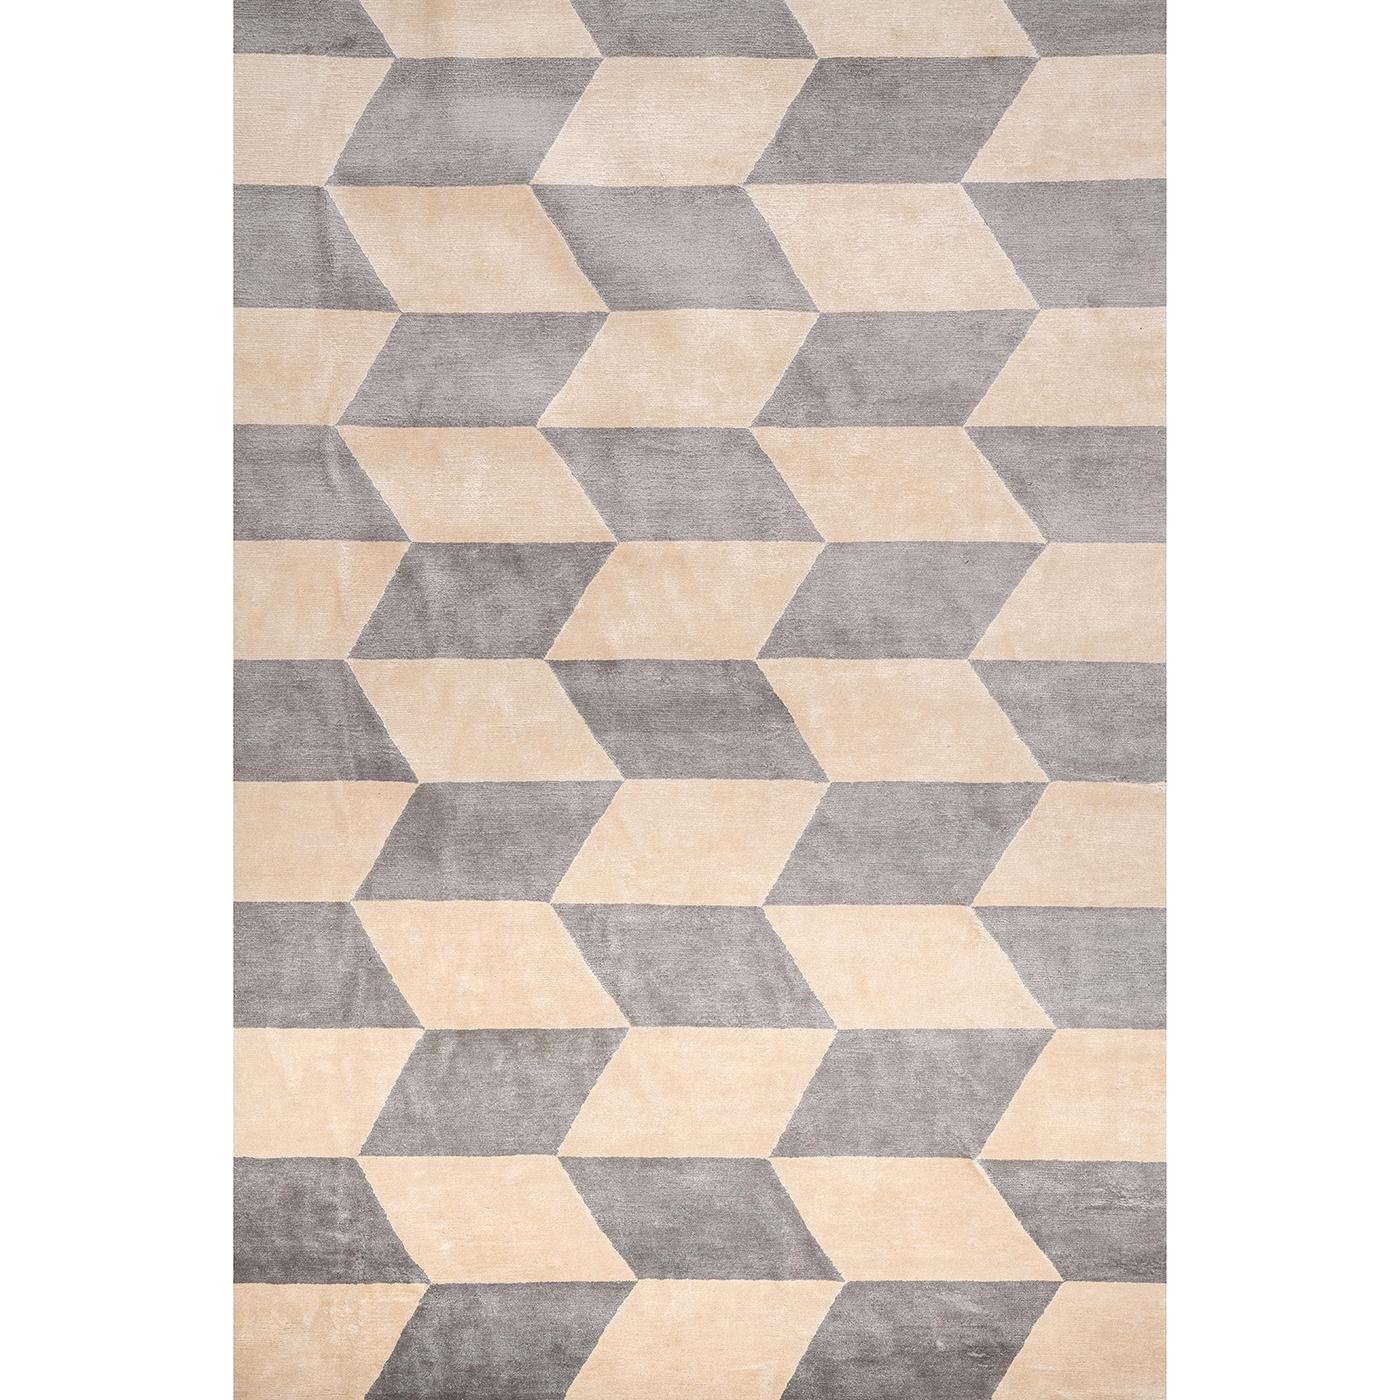 Customizable in size, material composition and coloring, this stylish rug is hand crafted in India in pure Chinese silk using a Tibetan knotting technique (100 knots per square inch). Featuring the warp and weft in high quality cotton, this carpet